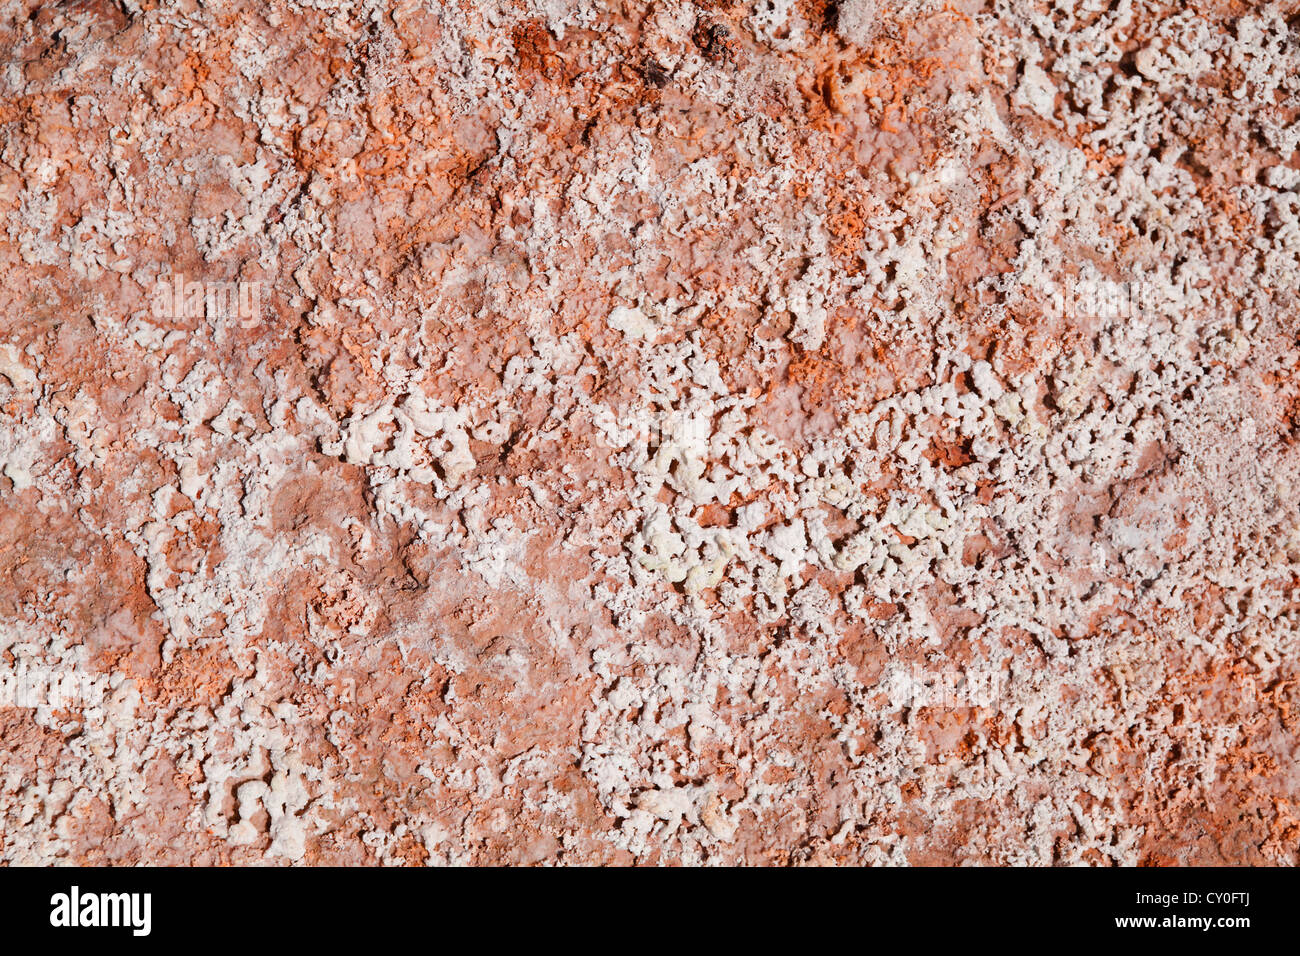 texture with acidic crystals on old stone Stock Photo